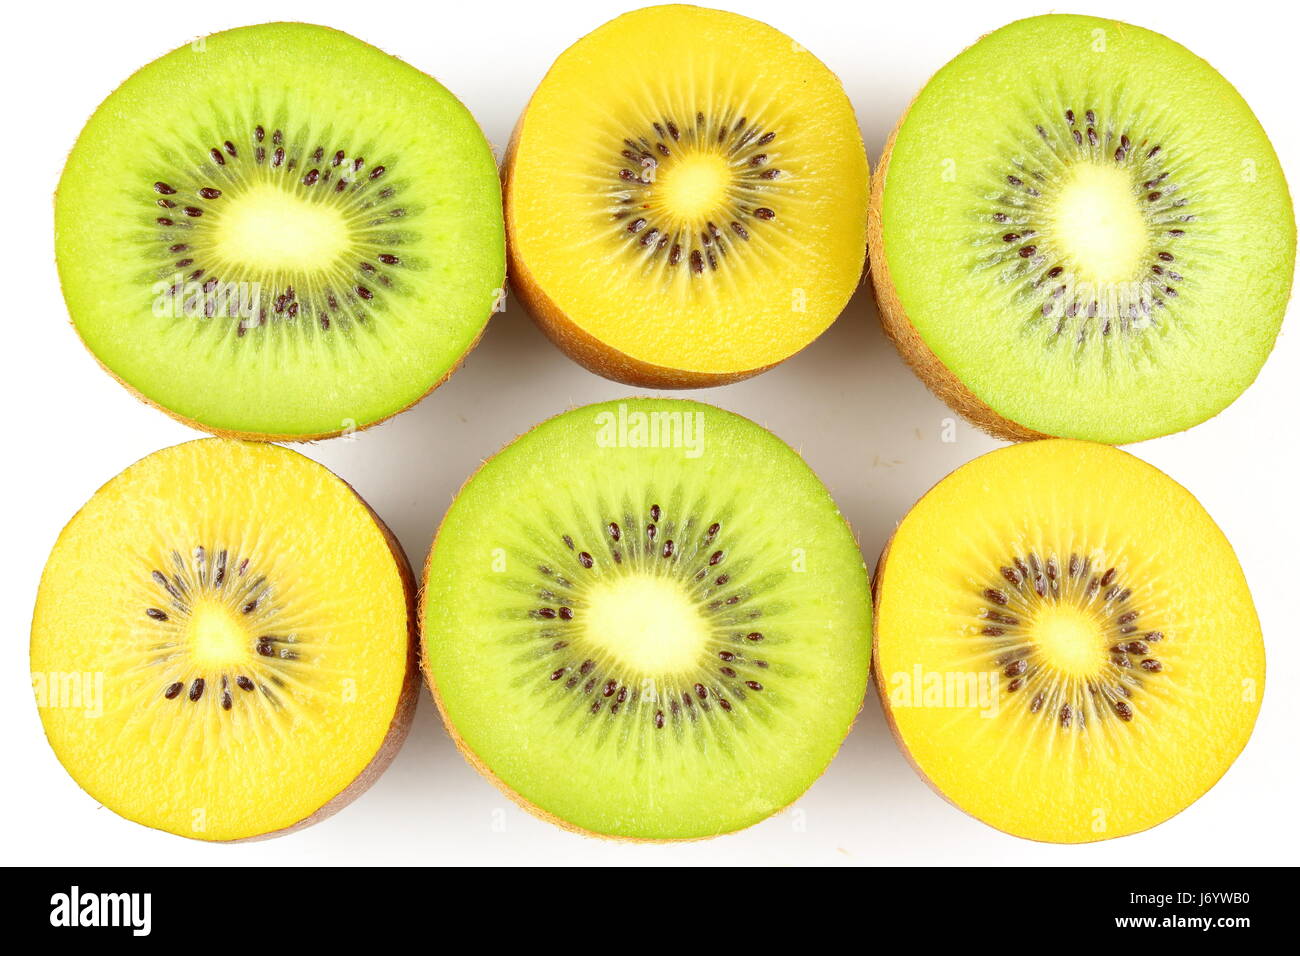 composition of fresh green and yellow kiwi fruits Stock Photo